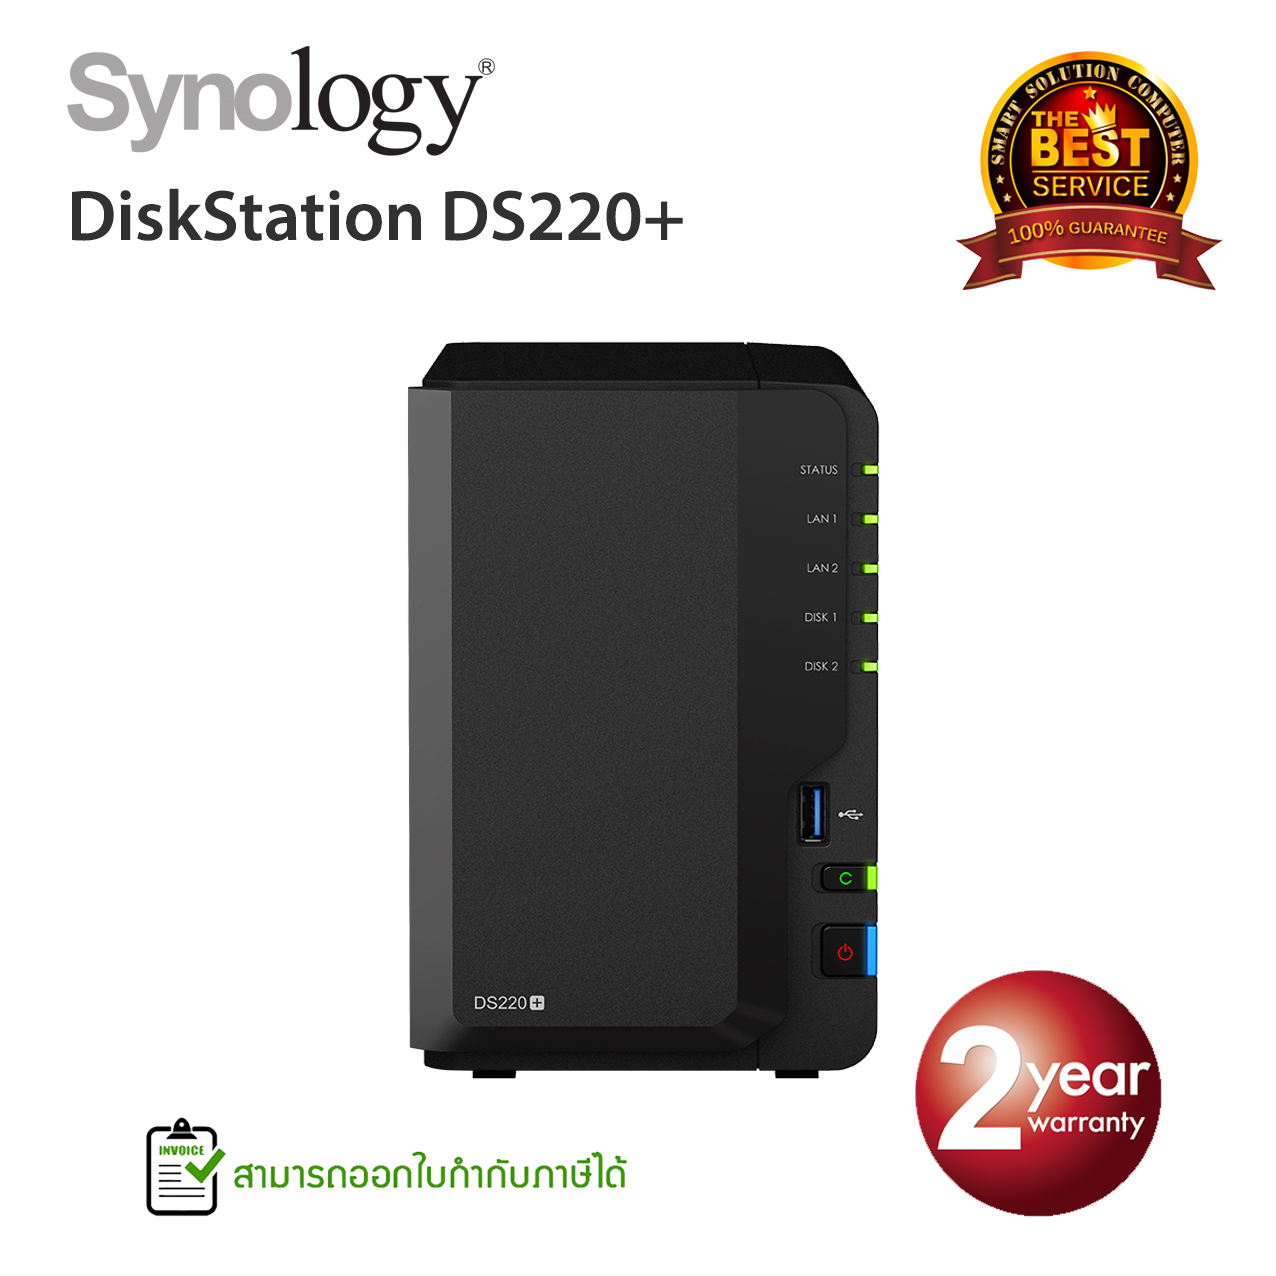 Synology DiskStation DS220+ 2-Bay NAS - NEW! 2020